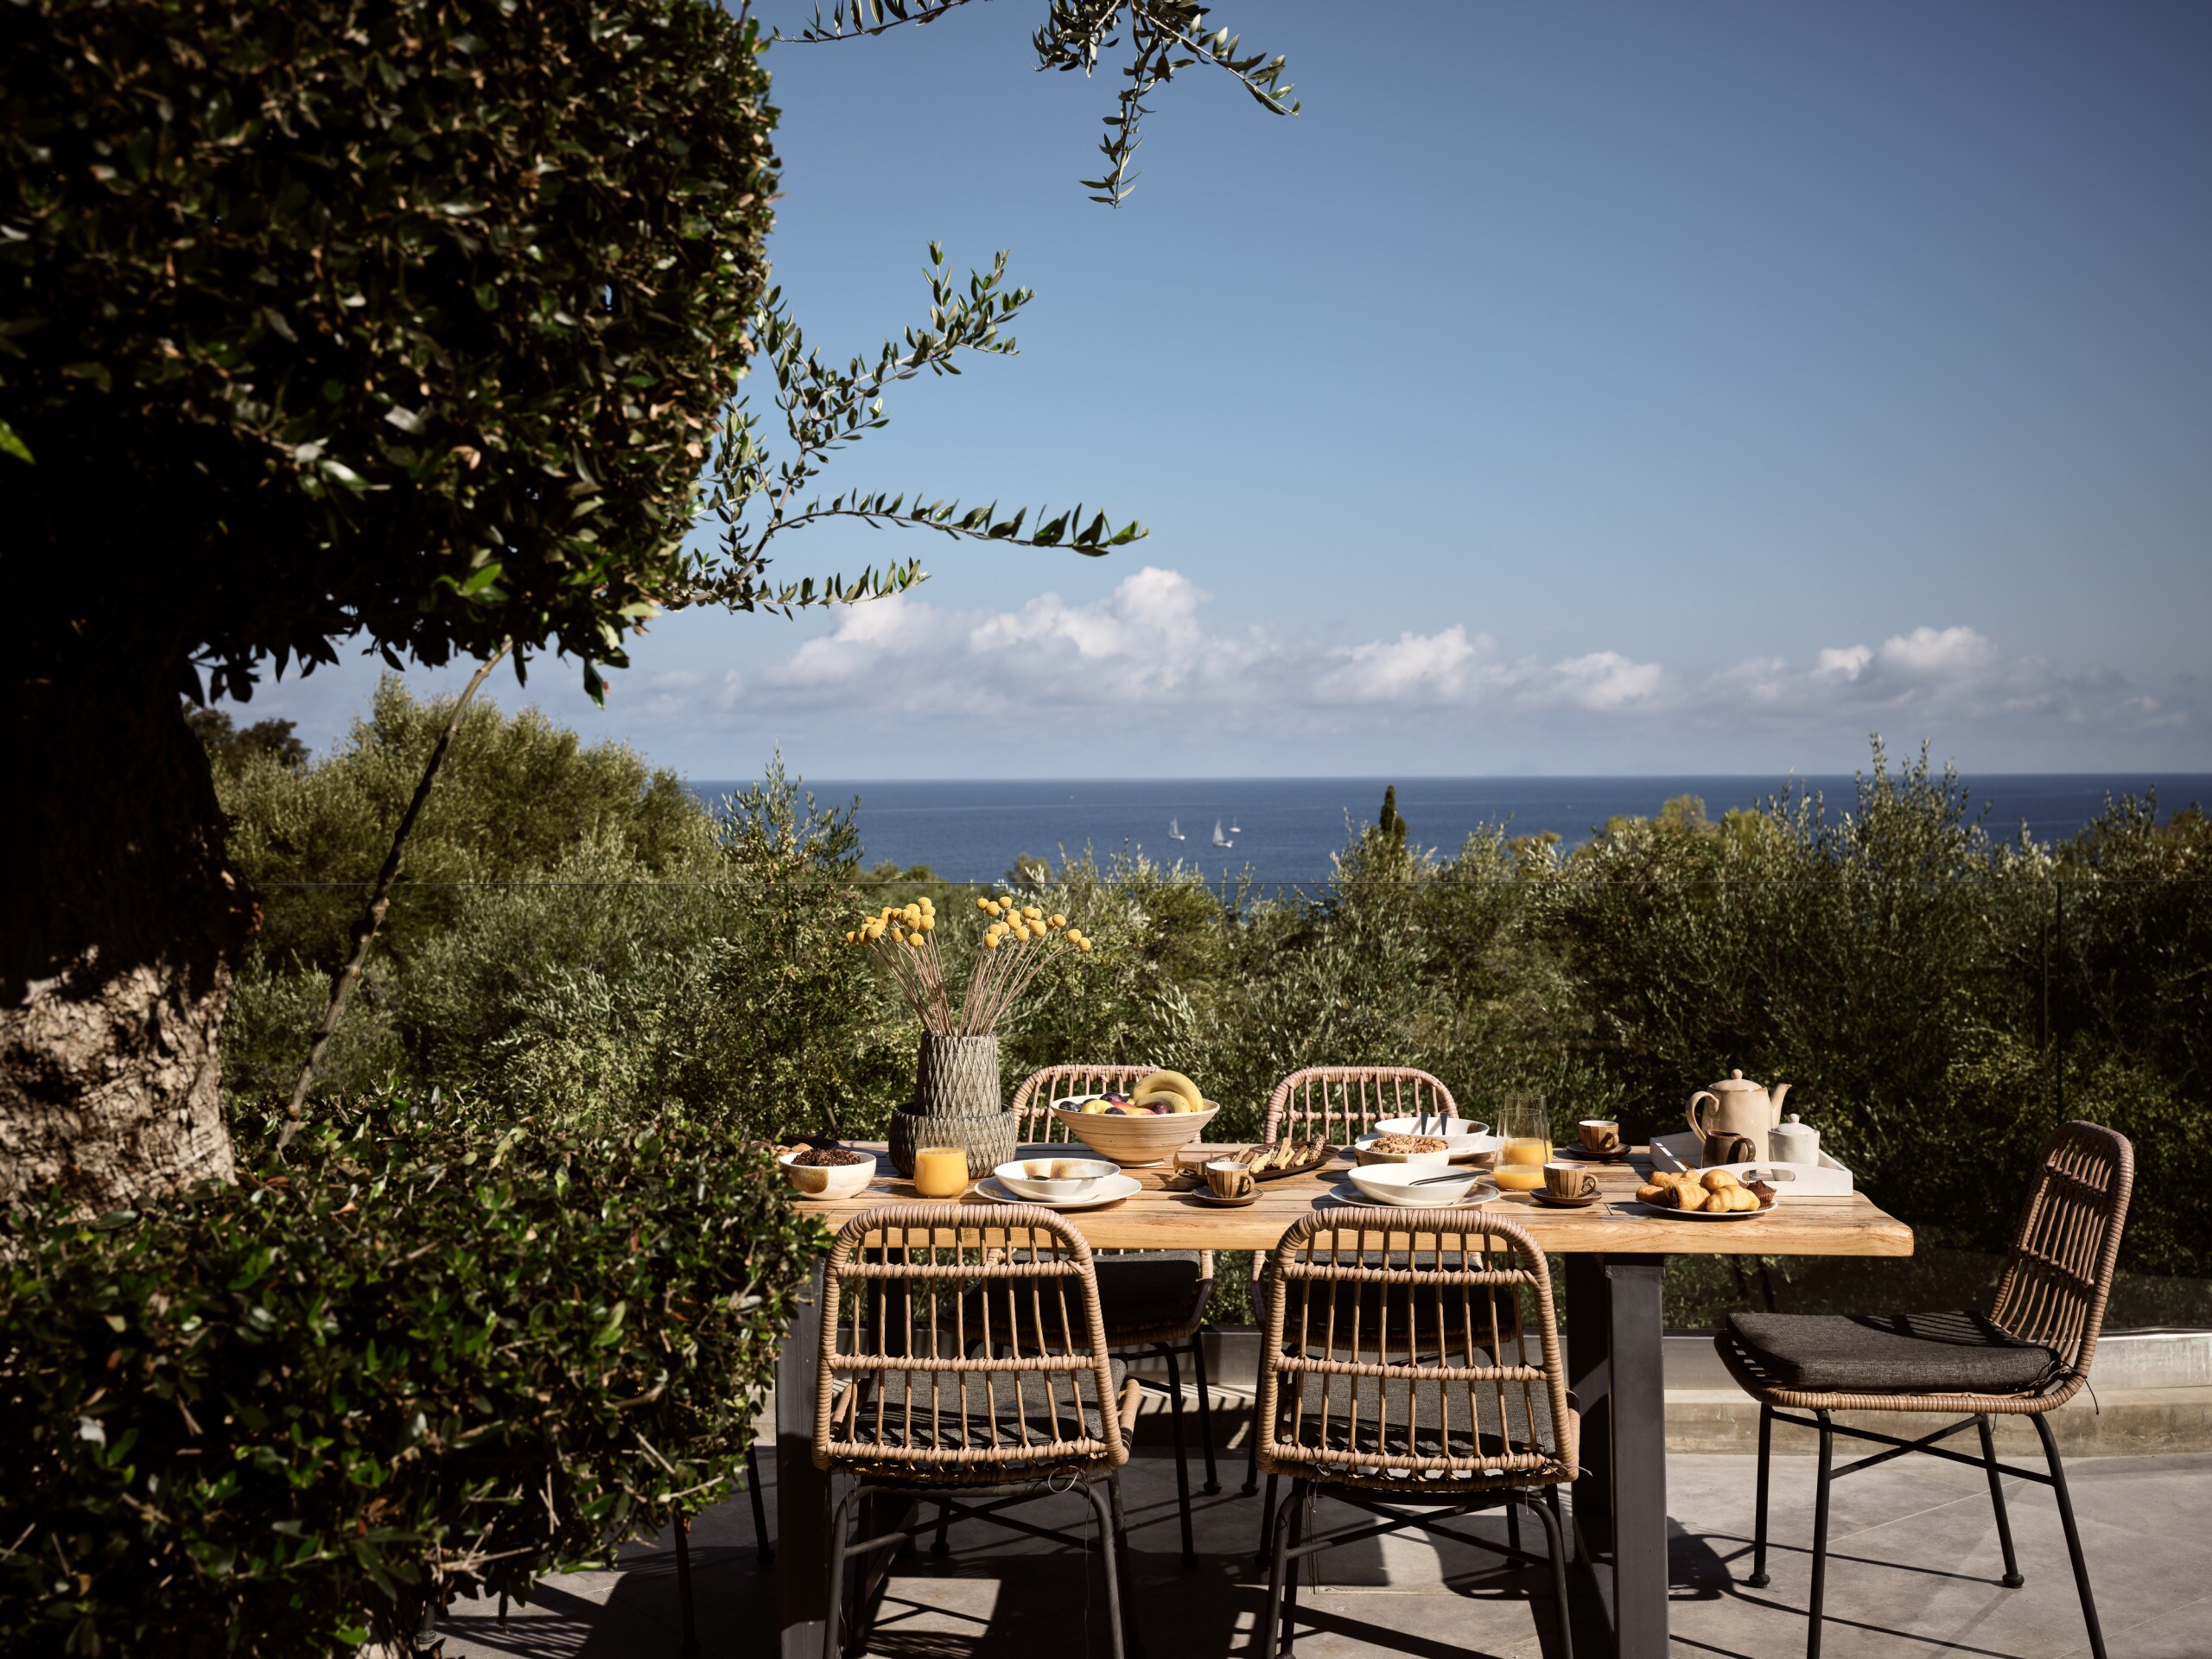 A well loved and welcoming place to rest and restore overlooking the Ionian Sea.